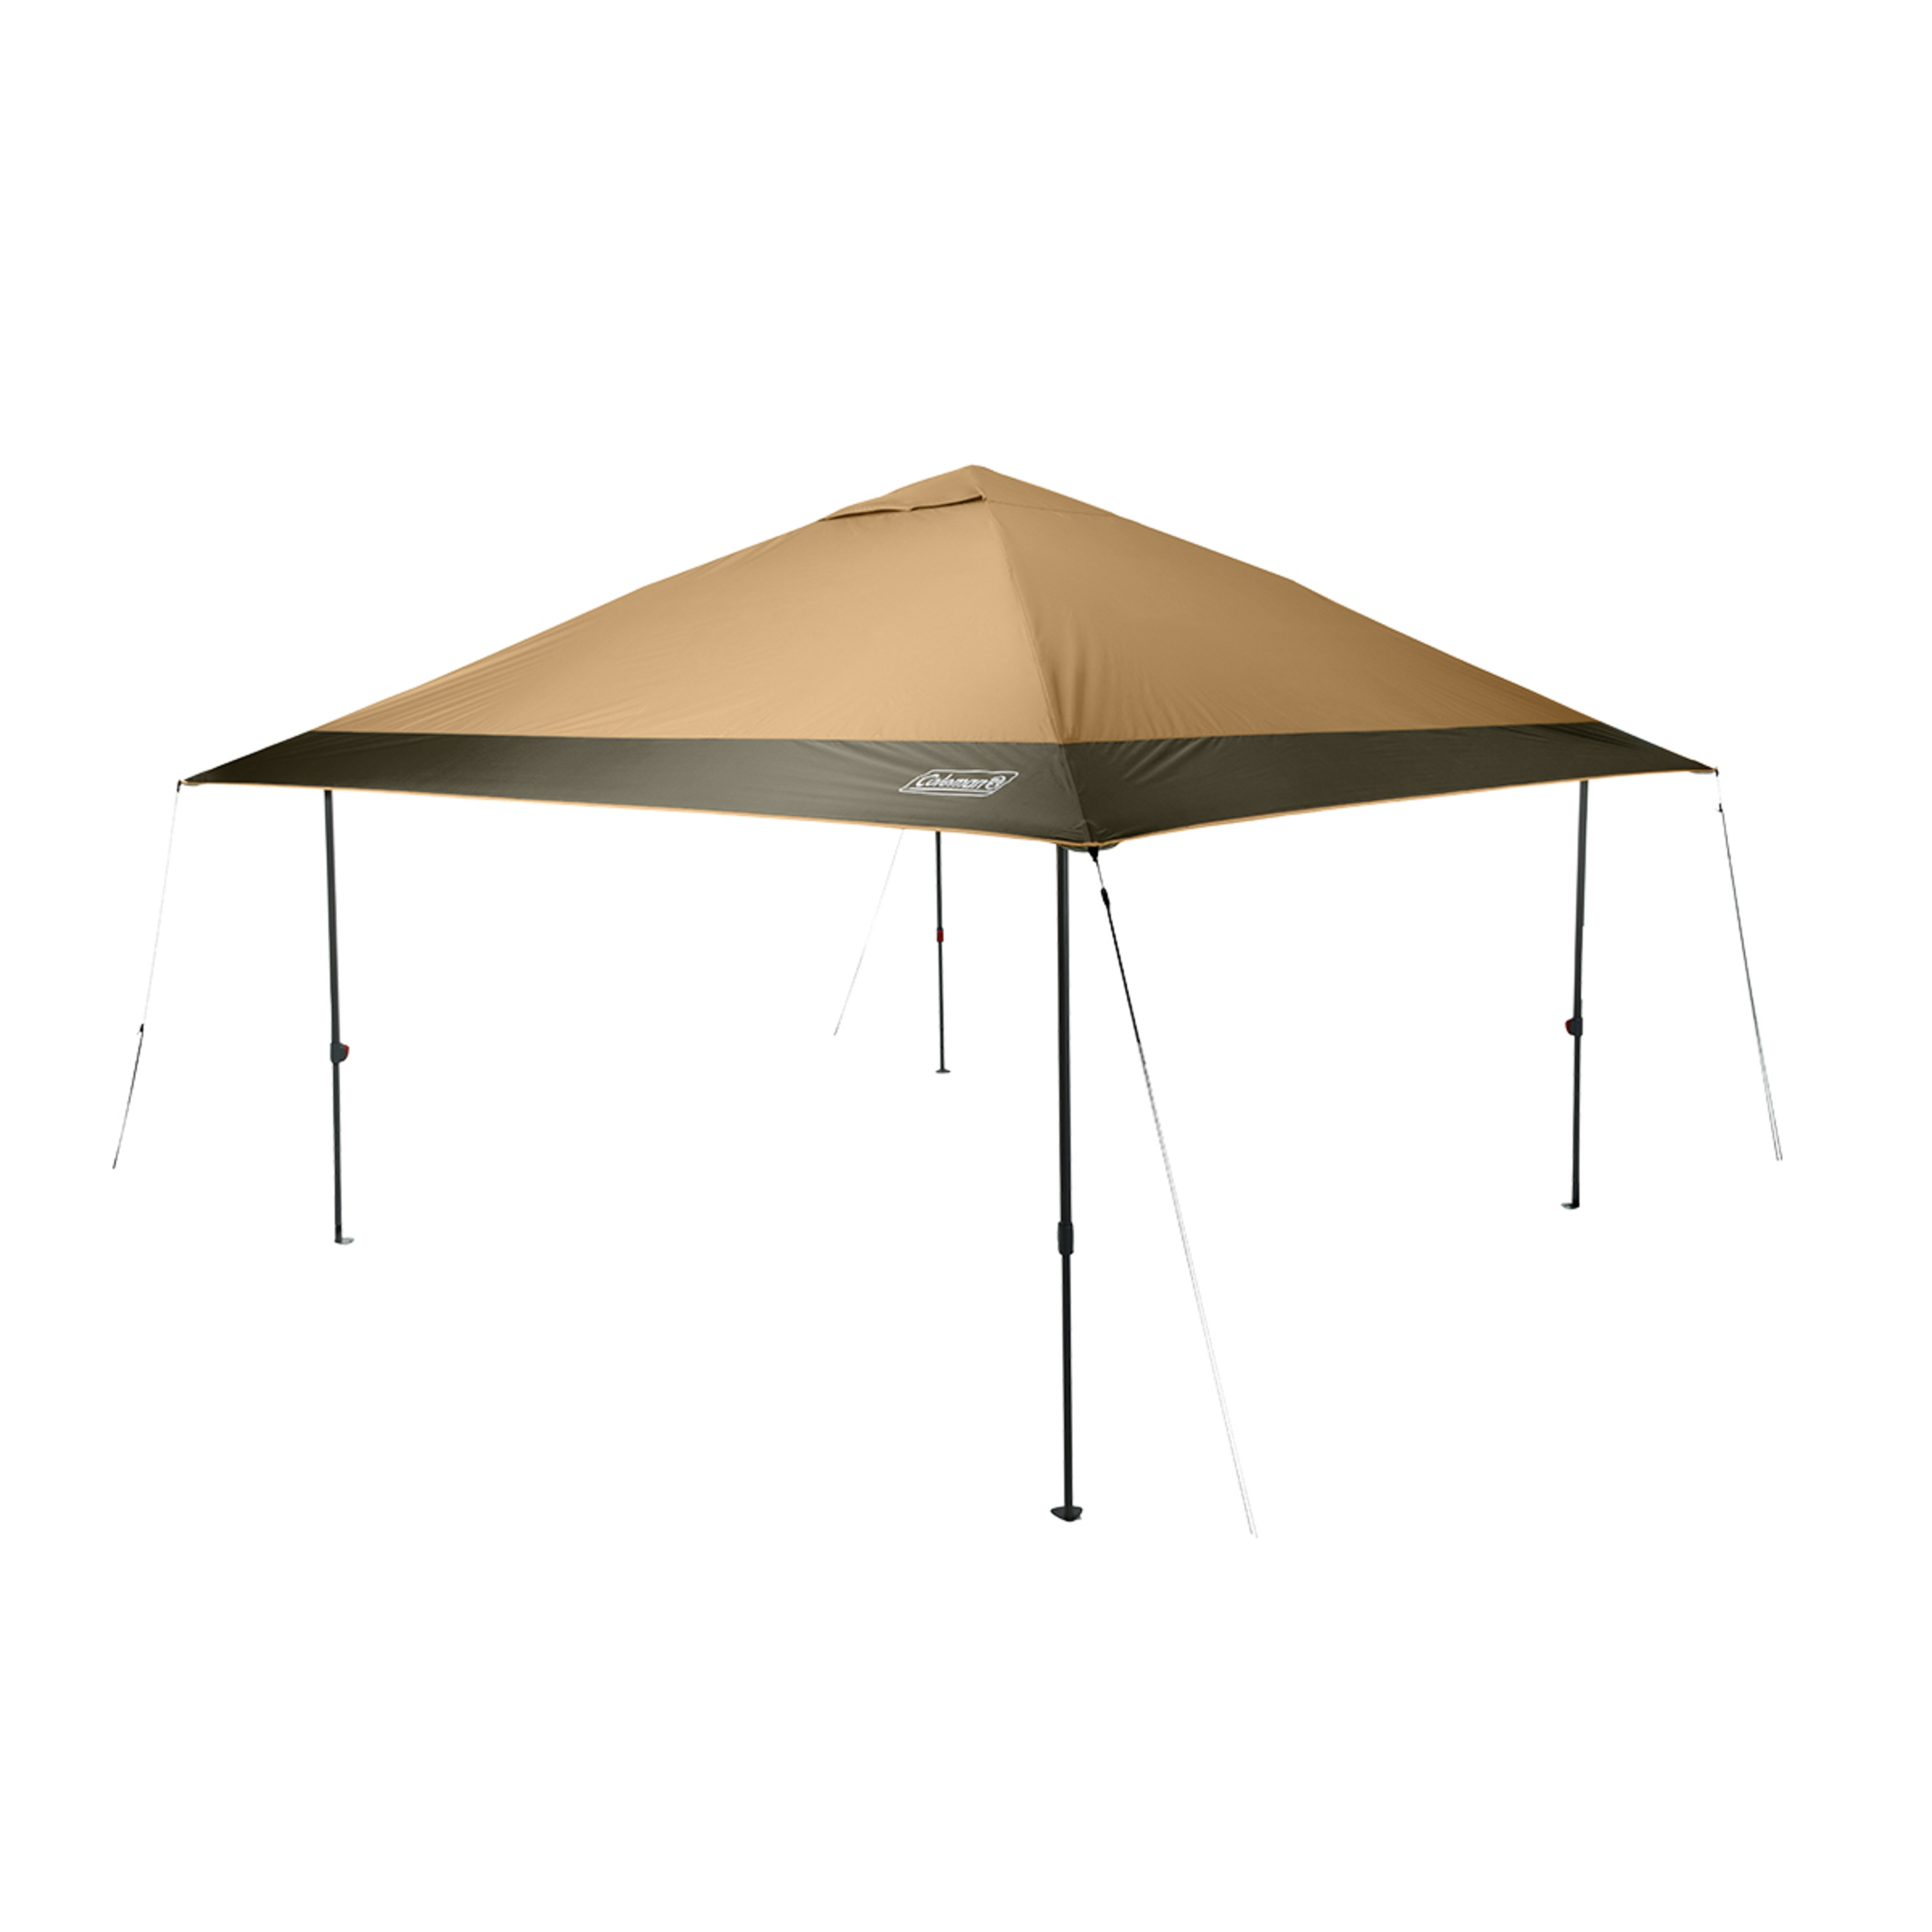 Coleman Oasis™ 13' x 13' x 9.7' Brown Straight Leg Pop Up Outdoor Canopy Sun Shelter Tent - image 1 of 10